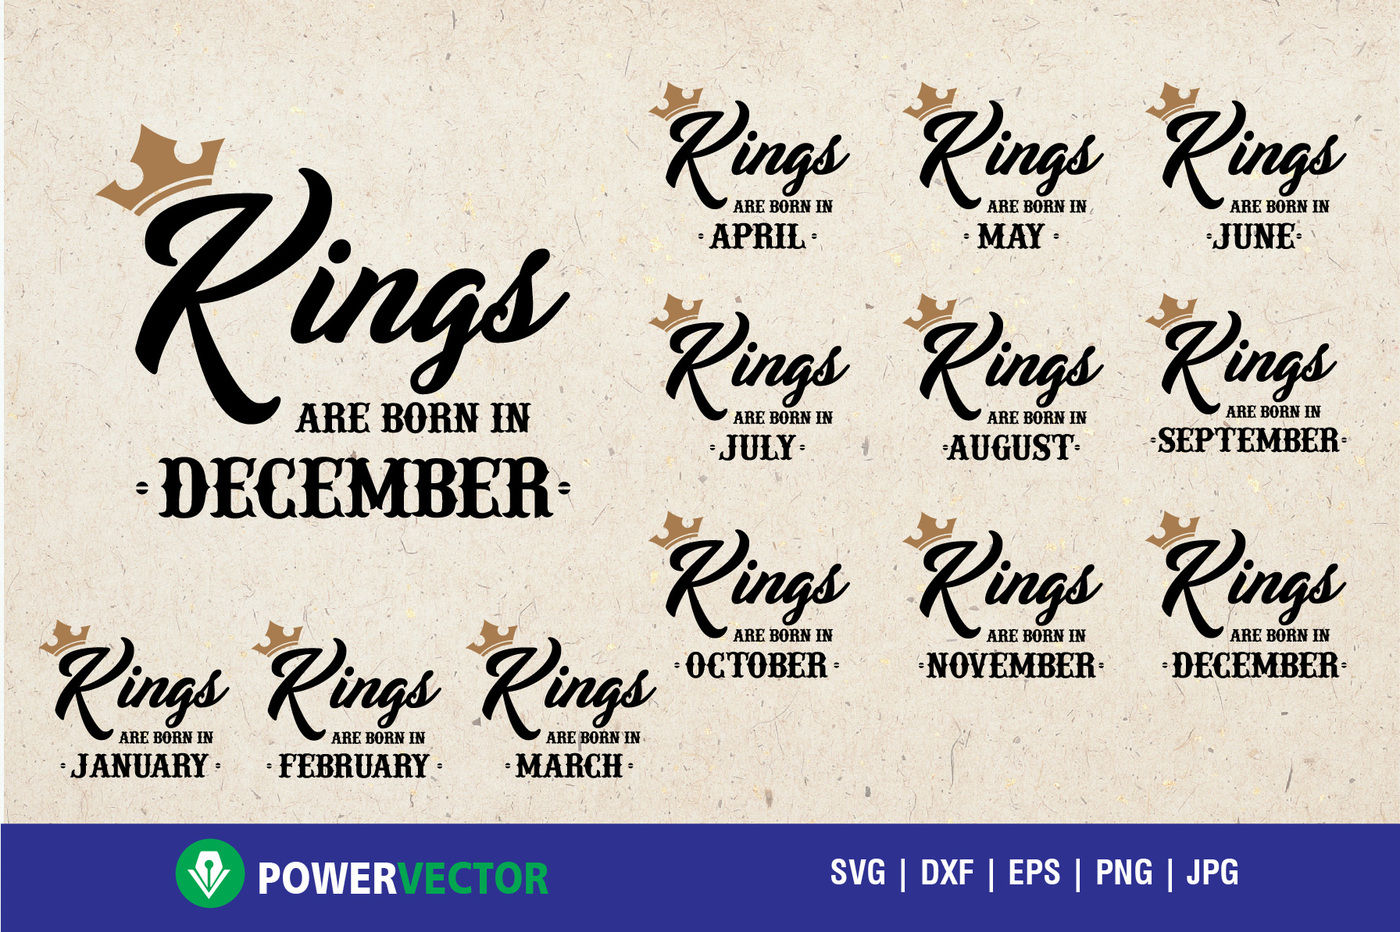 ori 3487245 b2af8ec144cc5e25b2fb457c6086353270adb026 kings are born in december king svg kings are born svg dxf eps